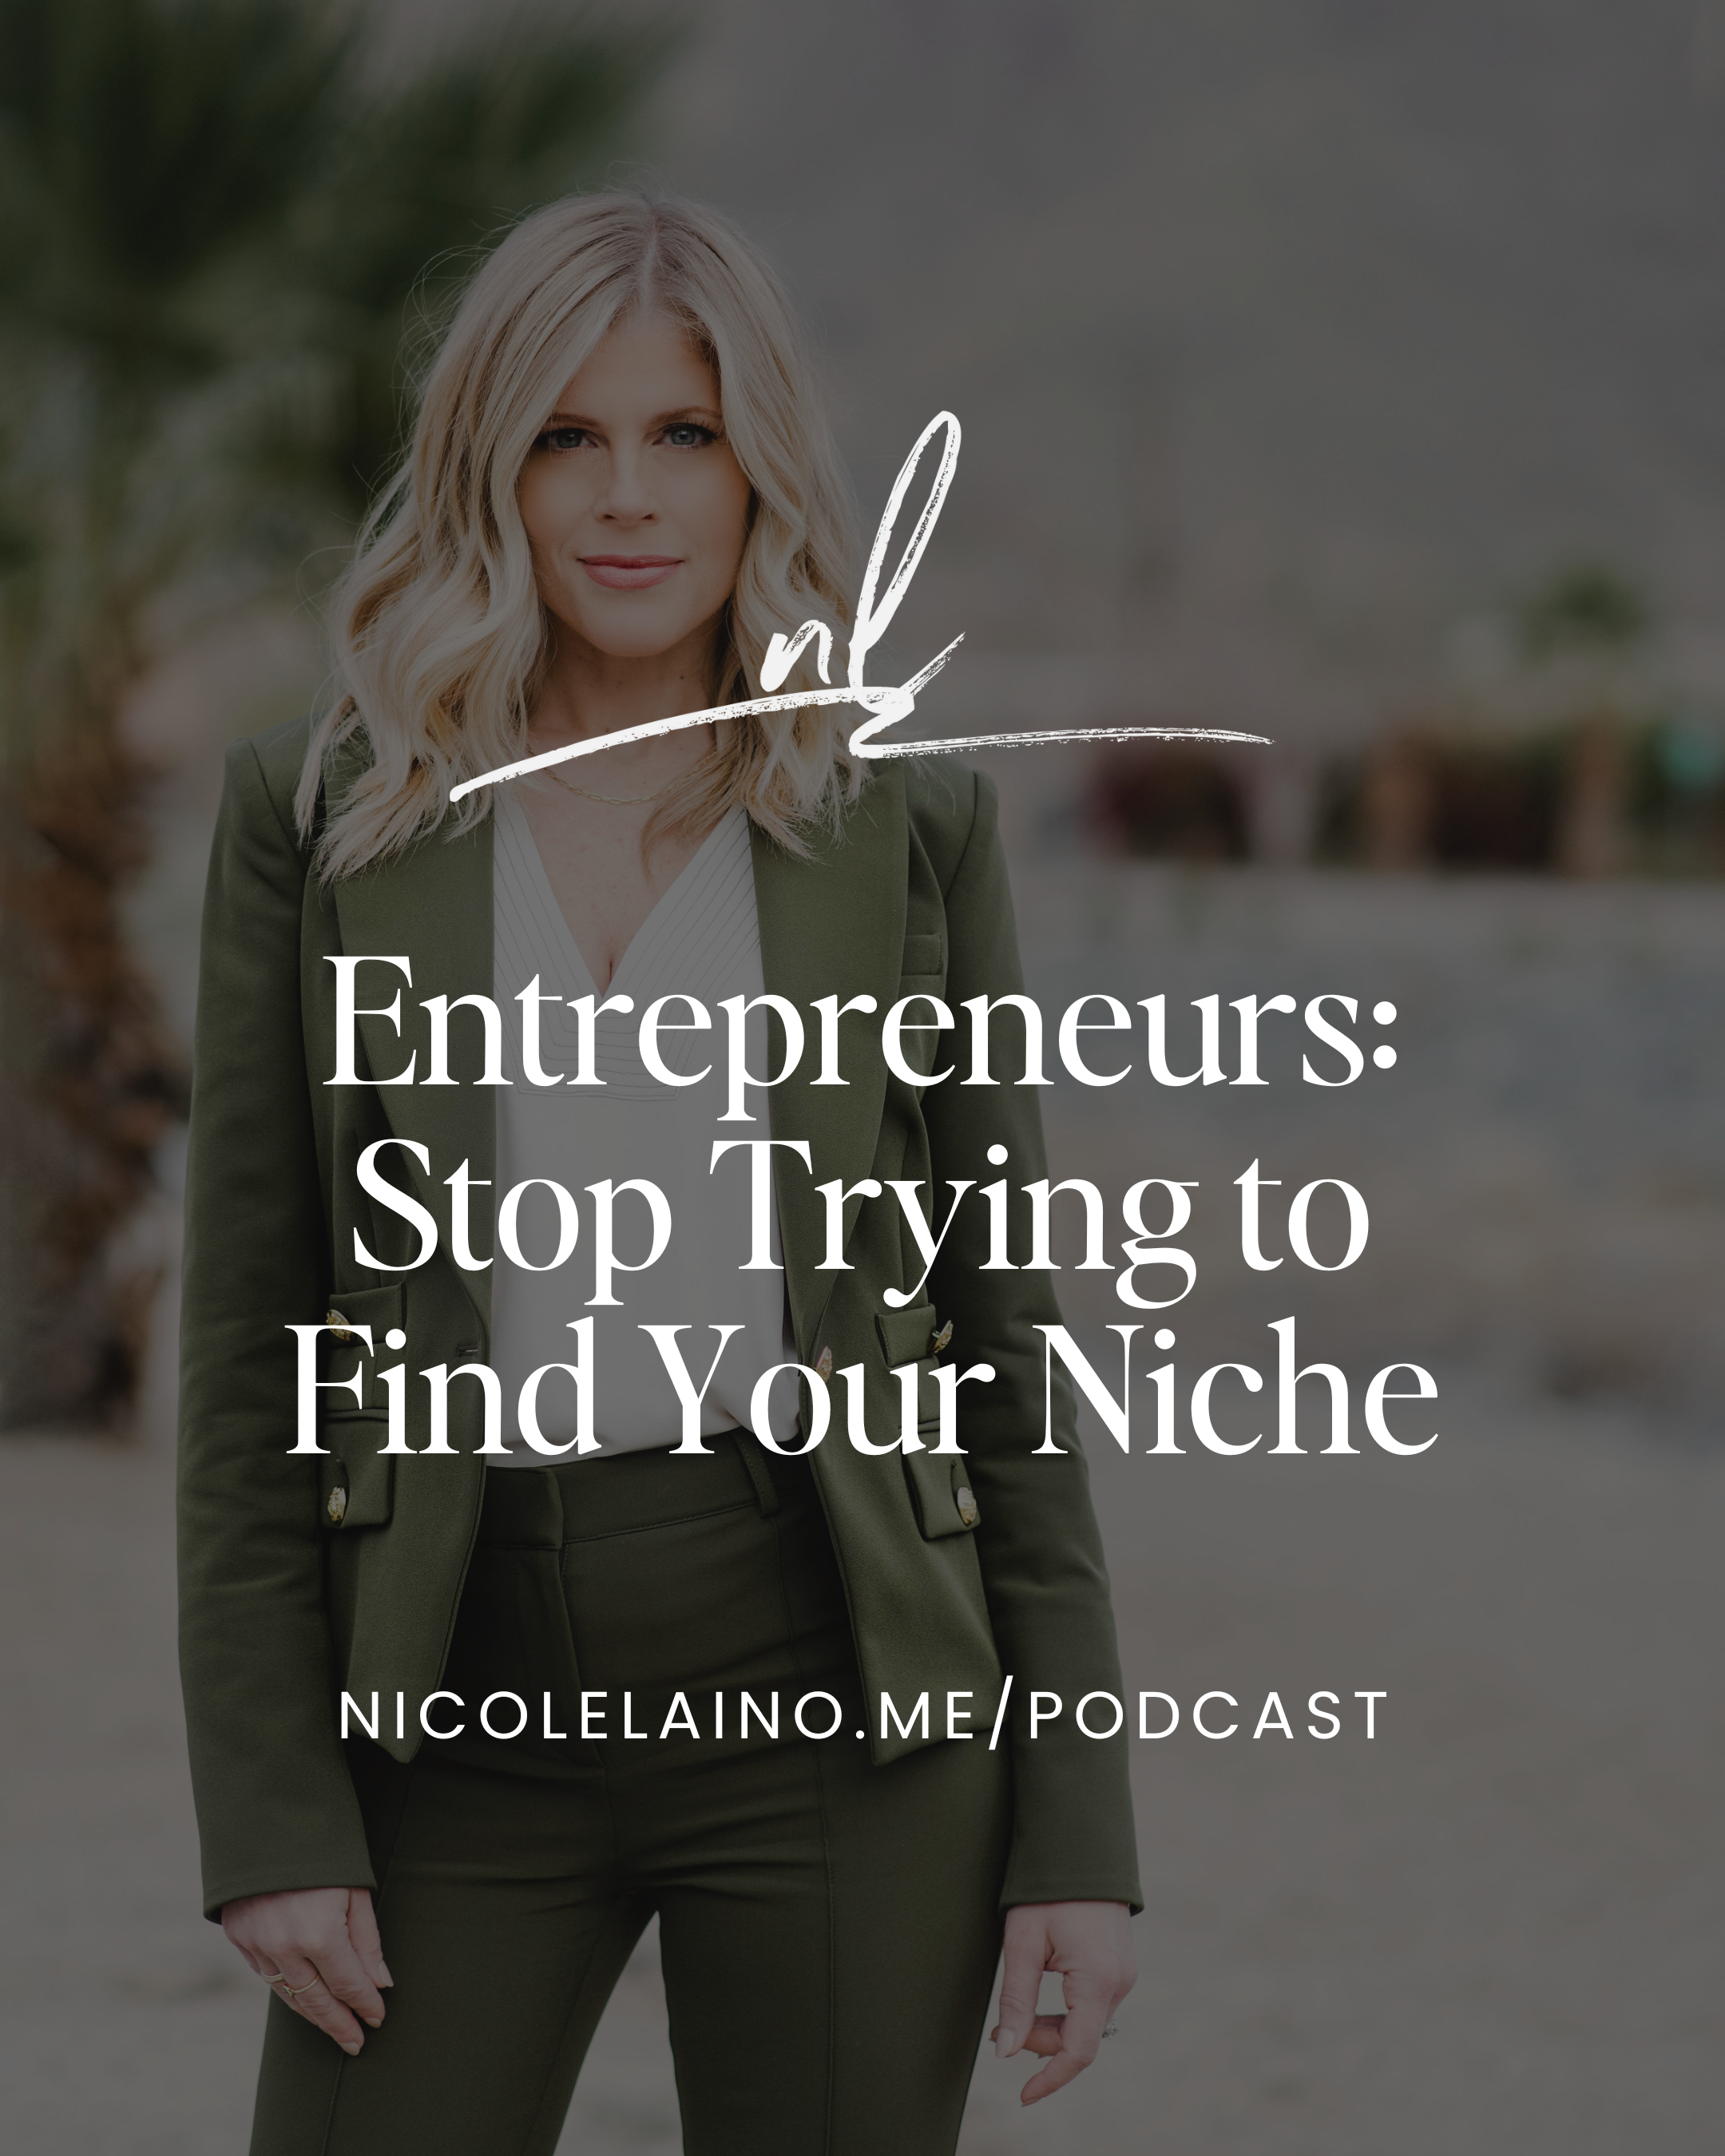 Entrepreneurs: Stop Trying to Find Your Niche